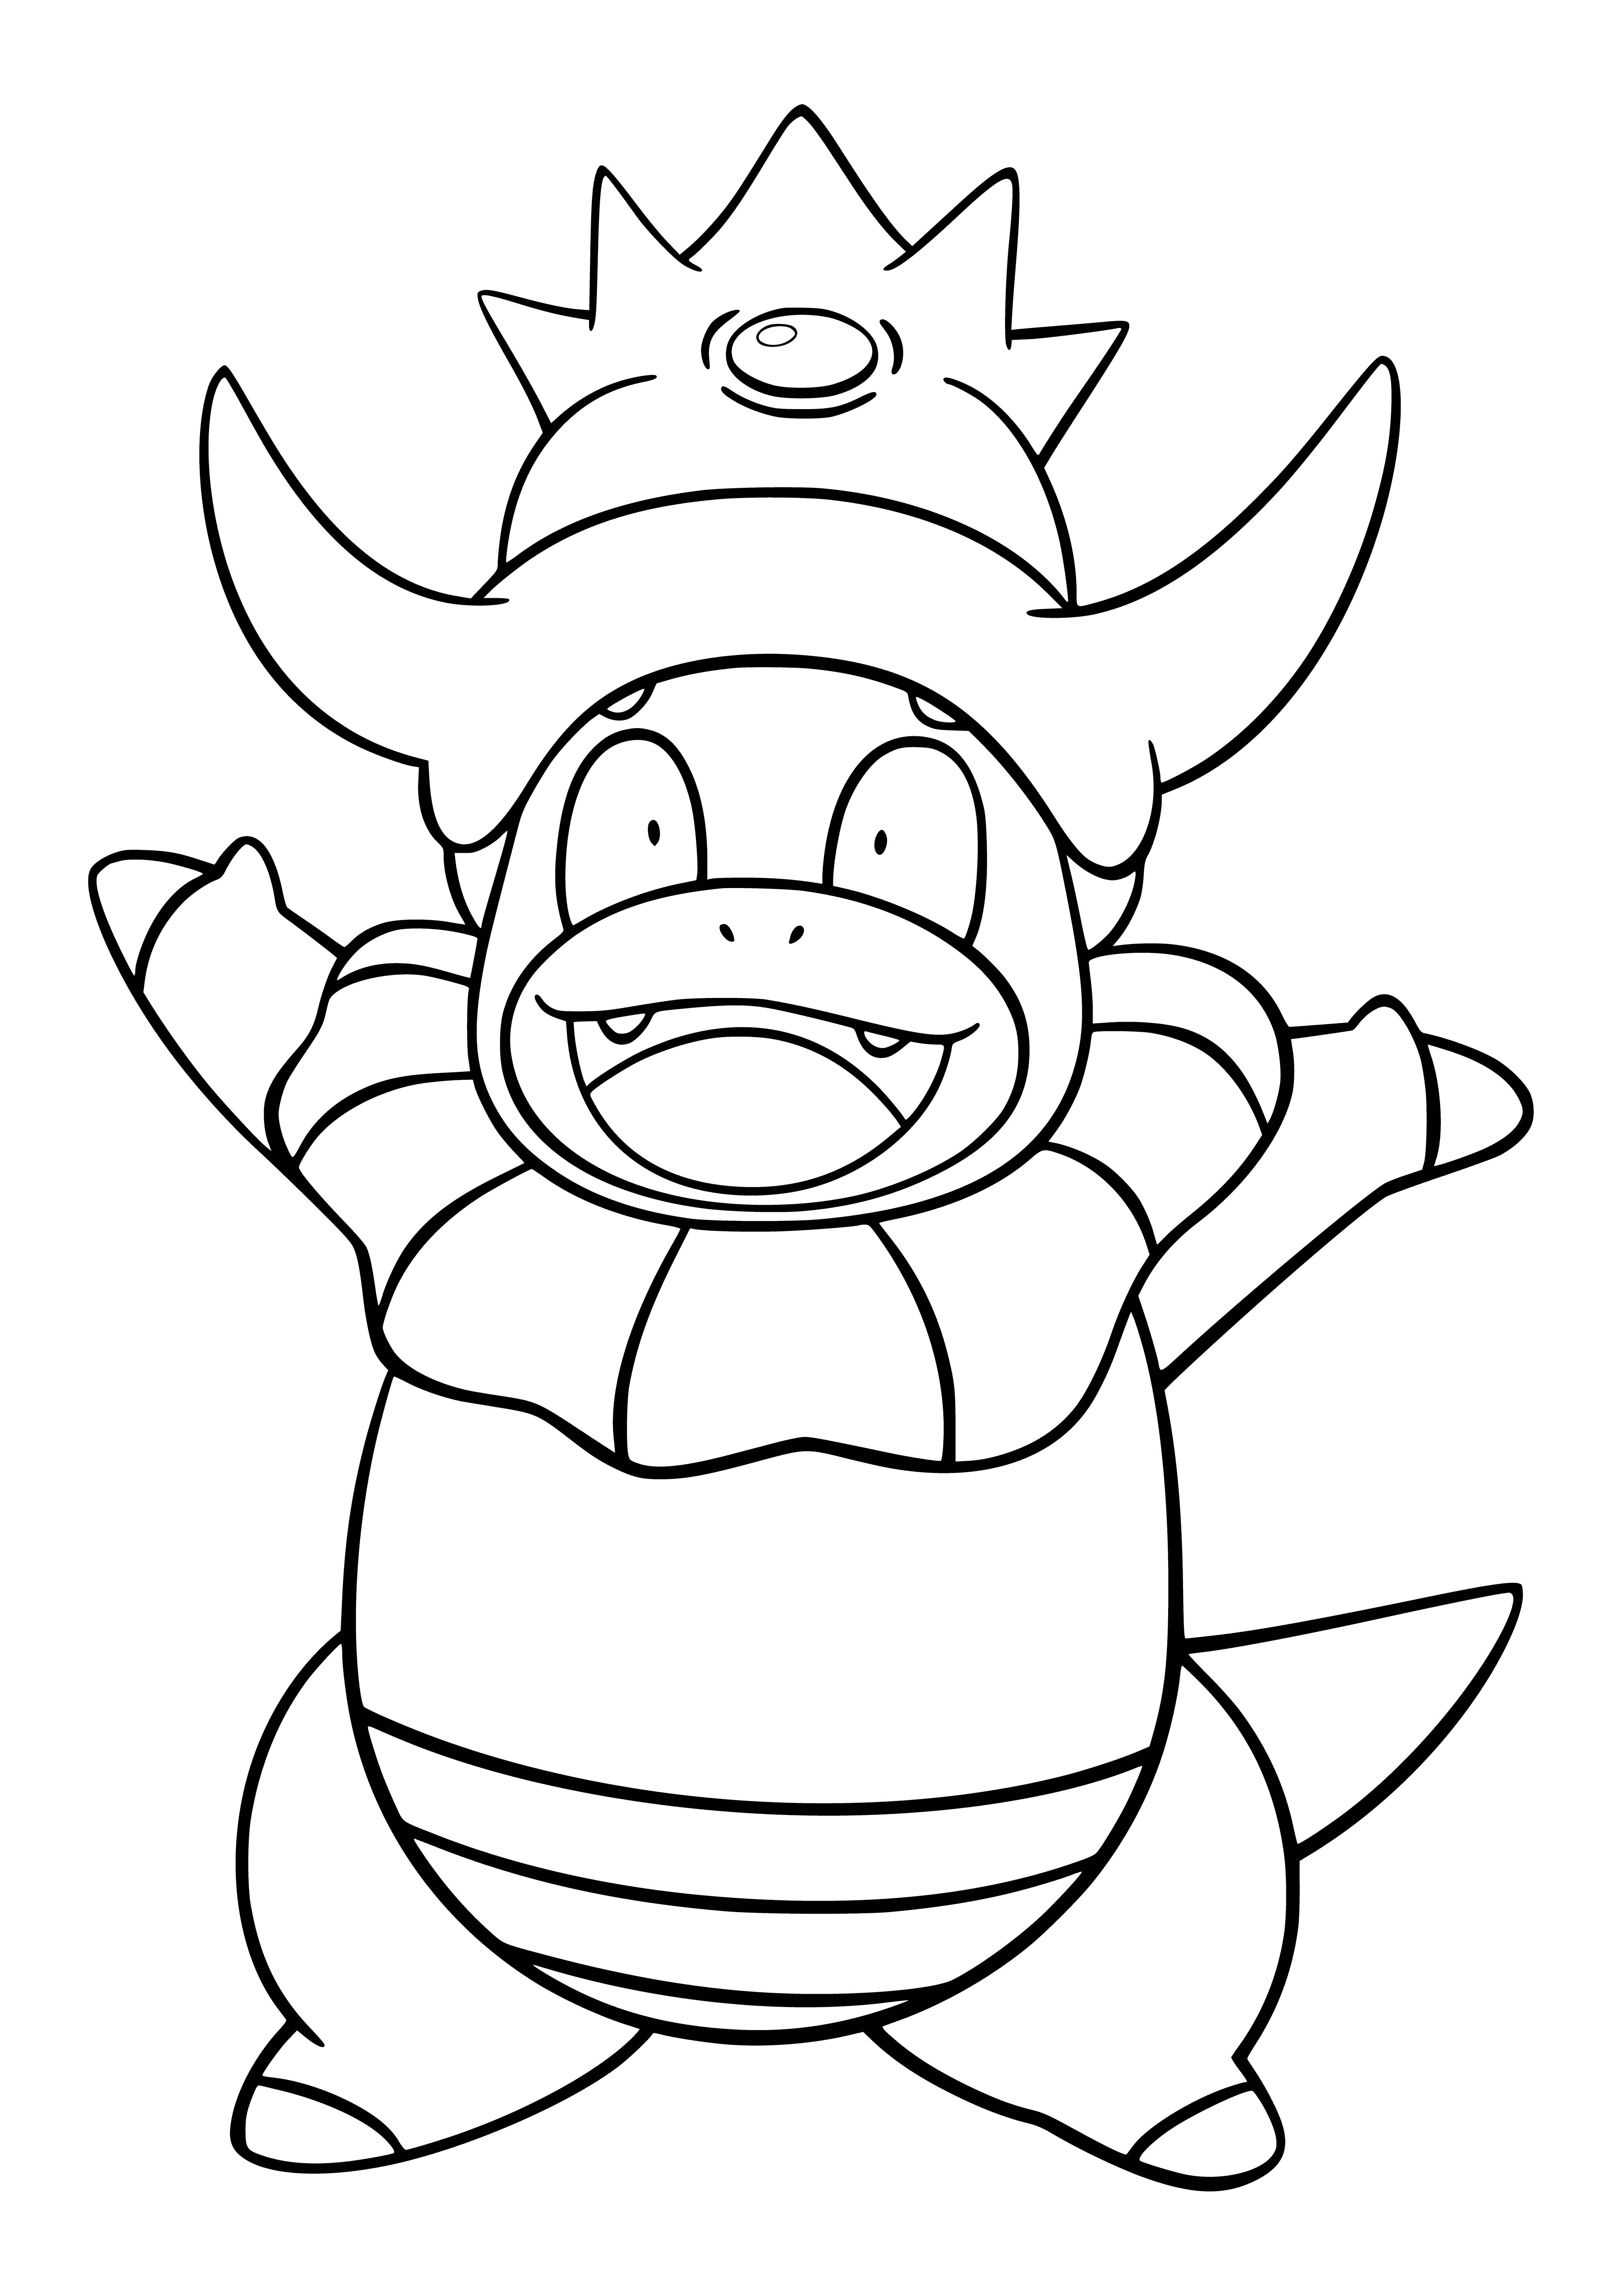 coloring page: Slowking is a large, pink & white Pokemon with a long neck, yellow eyes, 2 long tongues, white fur, & a long thin tail w/ black tip.